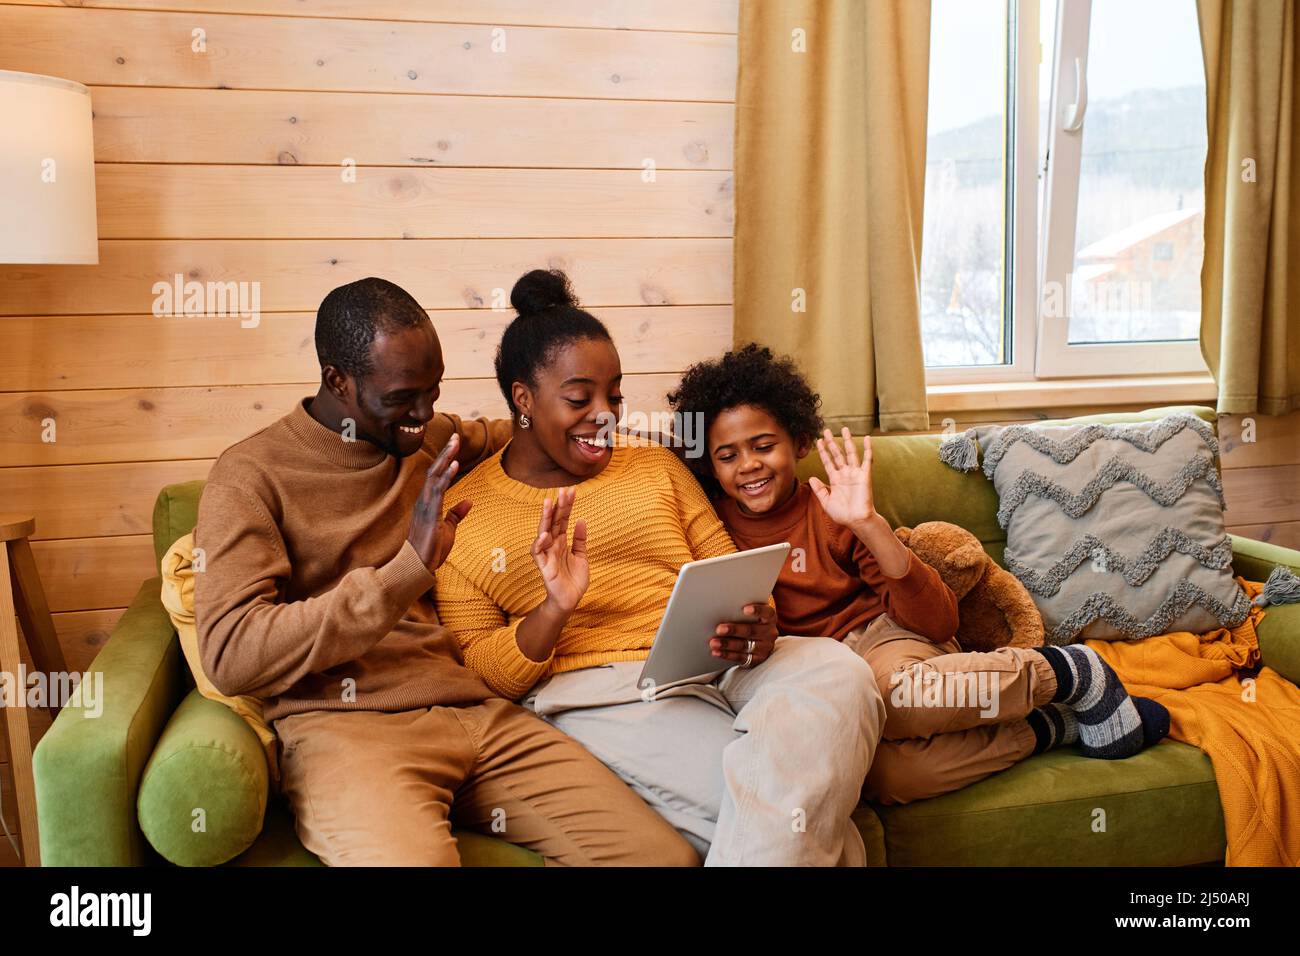 Happy family of three waving hands to someone on tablet screen during online communication while sitting on soft pistachio green couch Stock Photo